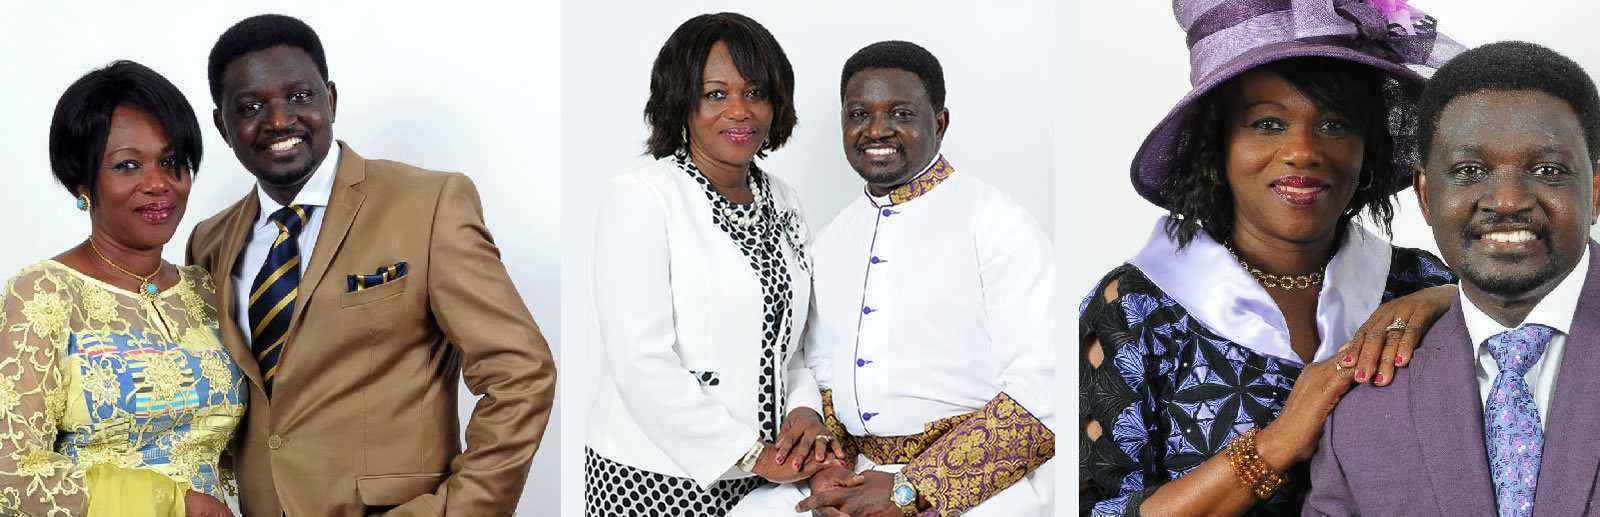 Picture of Bishop Charles Agyinasare and his wife Rev Vivian Agyinasare